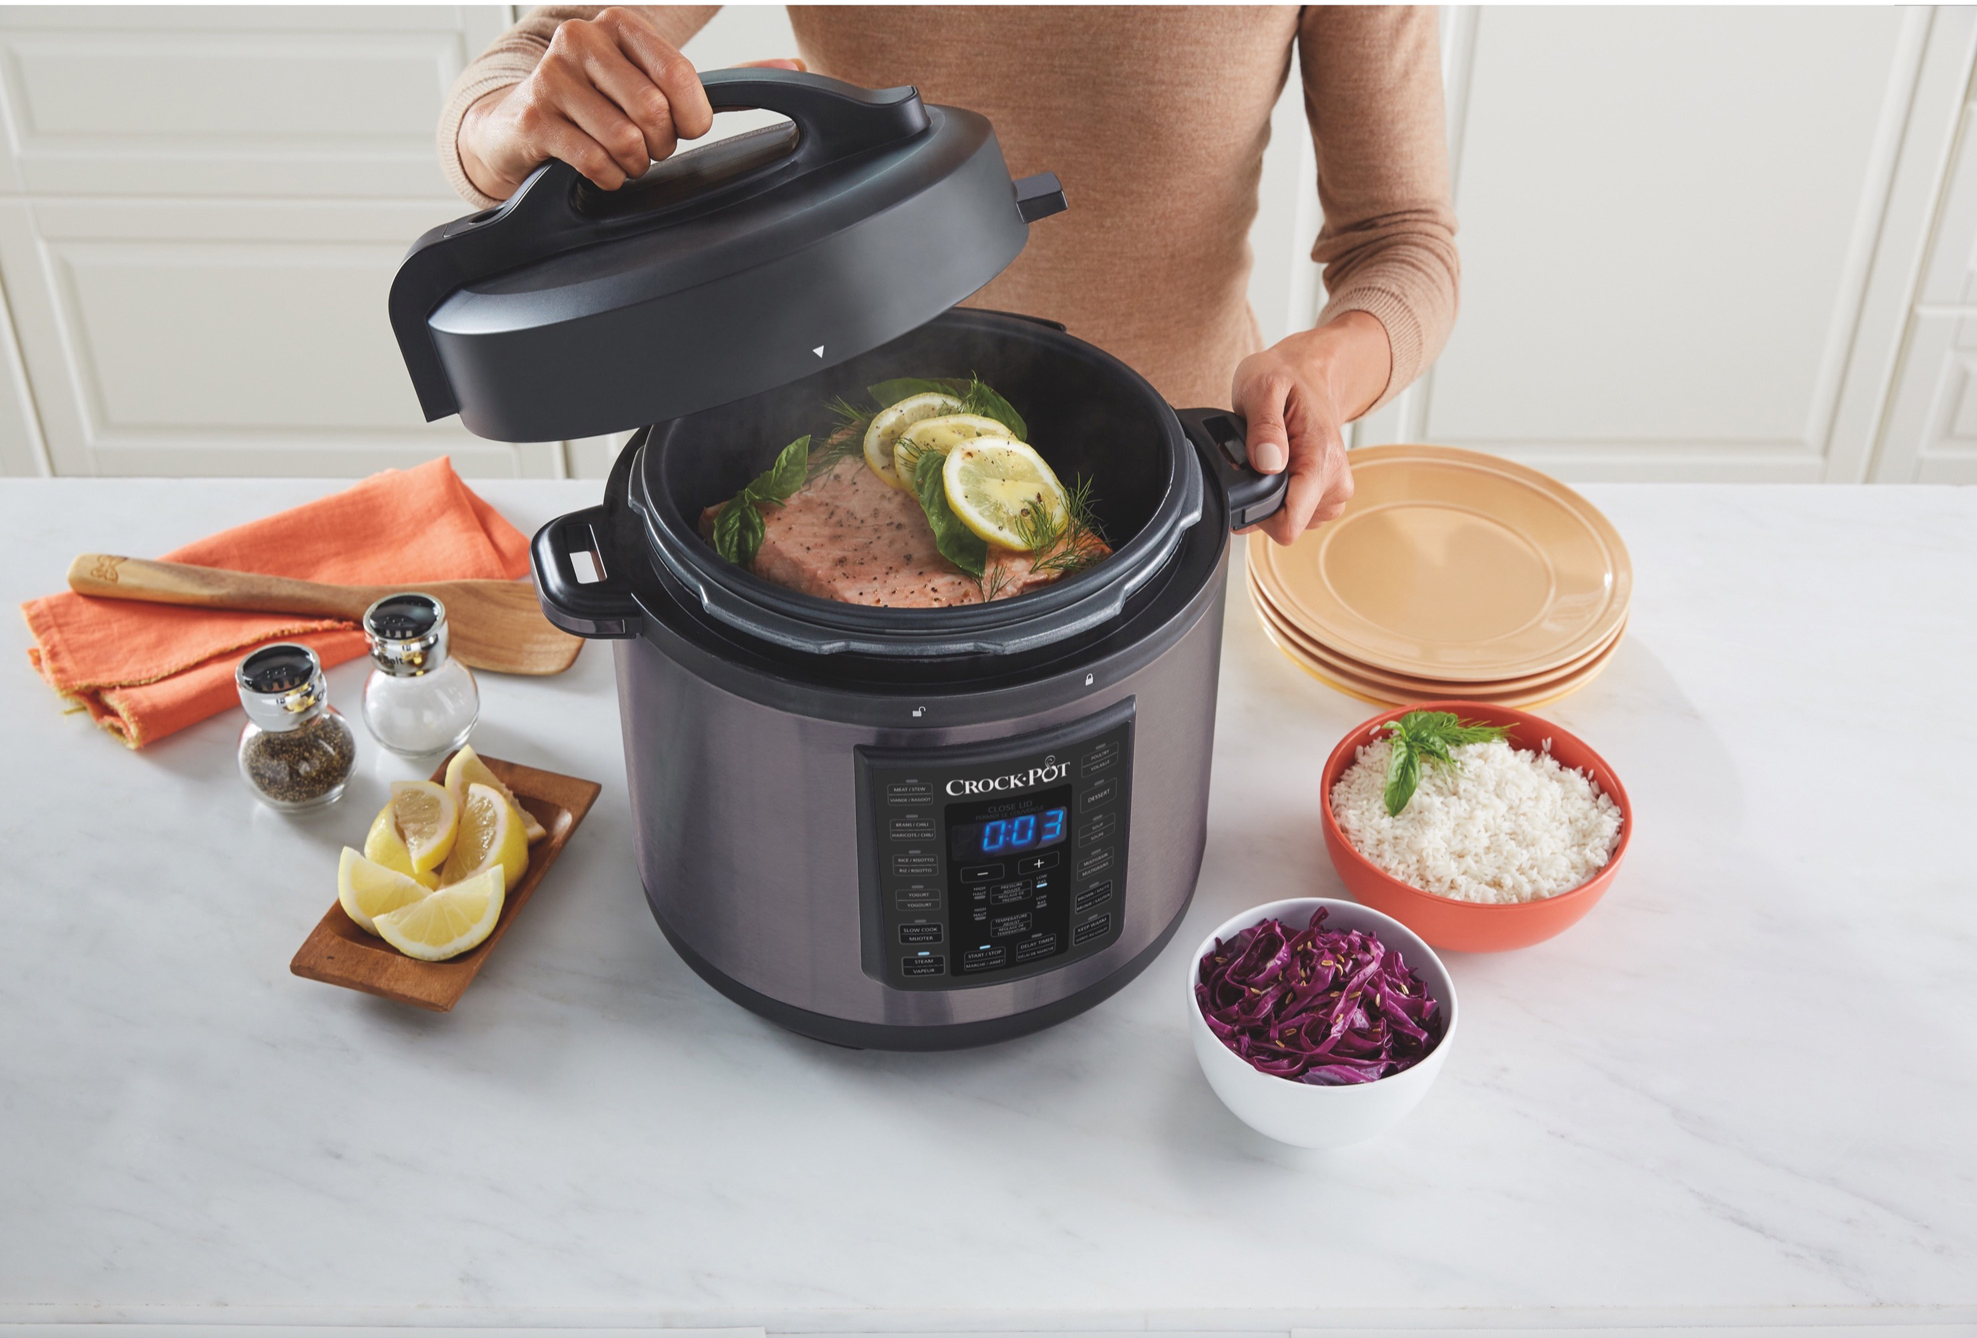 Crock-Pot 6 Qt 8-in-1 Multi-Use Express Crock Programmable Pressure Cooker, Slow Cooker, Sauté, and Steamer, Black Stainless Steel - image 3 of 10